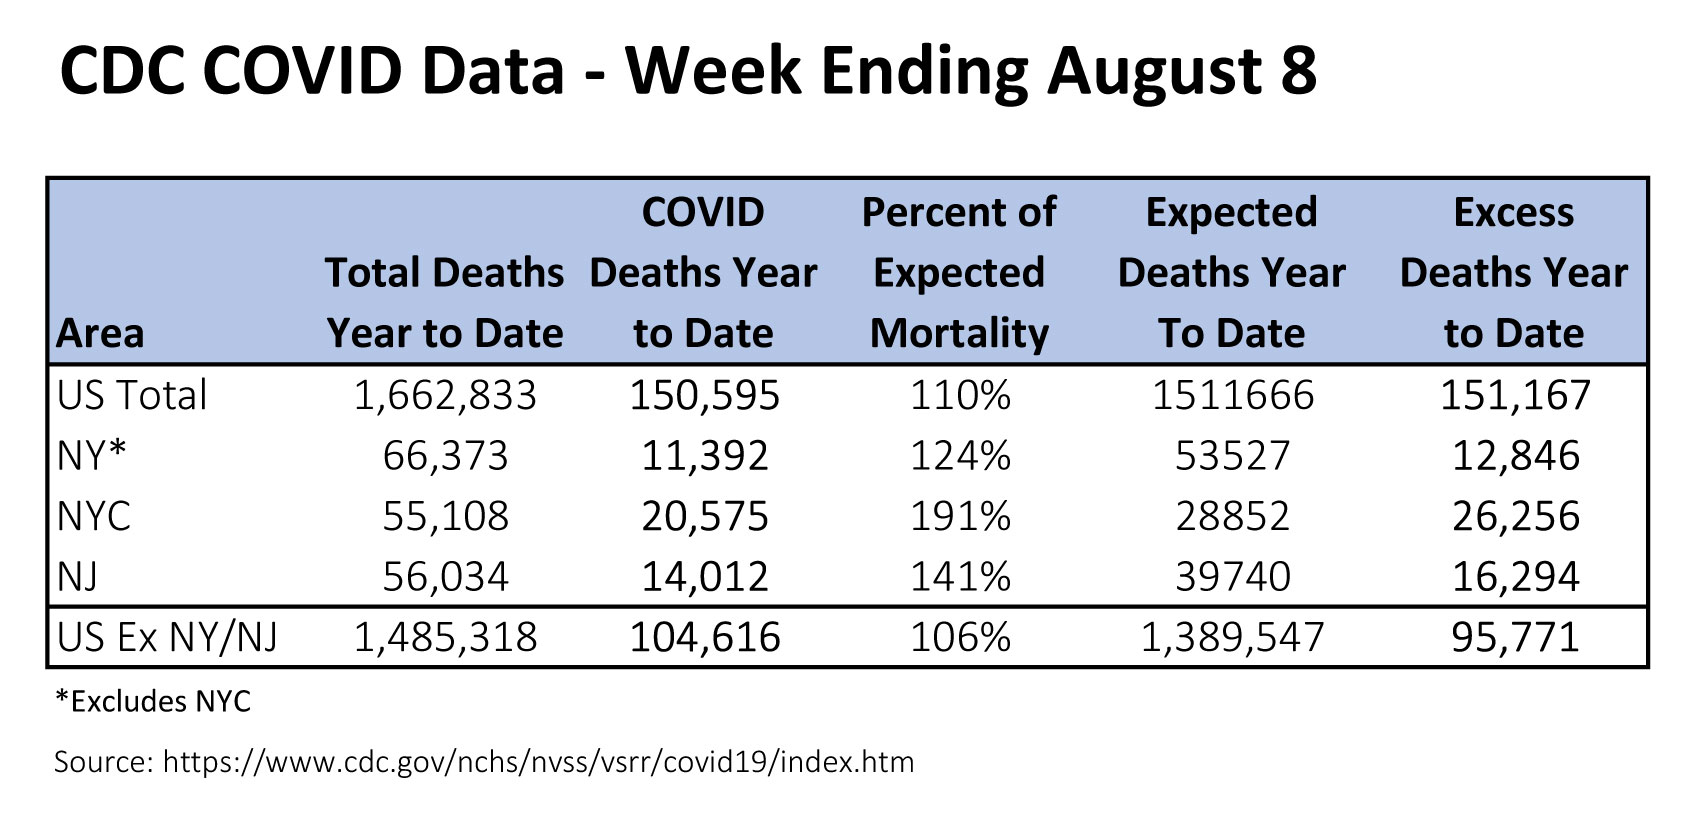 COVID Expected Mortality Rates